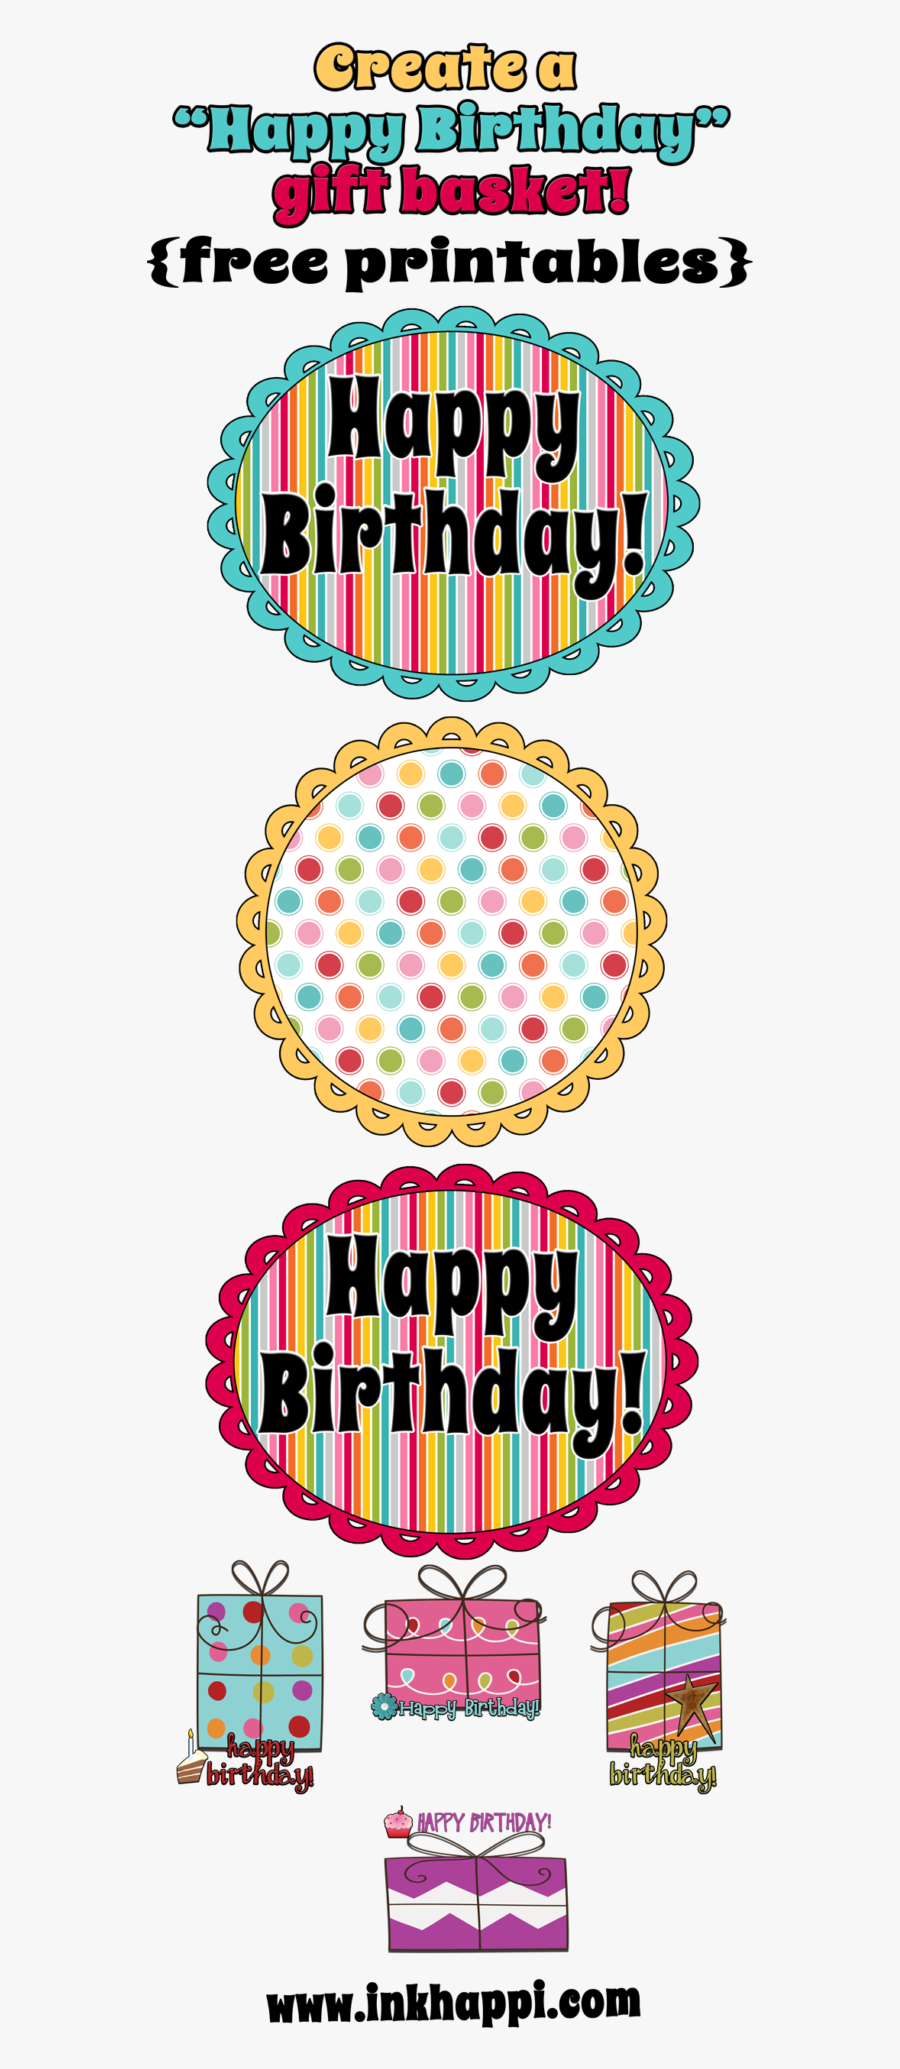 Birthday Gift Basket Ideas With Free Printables - Circle, Transparent Clipart